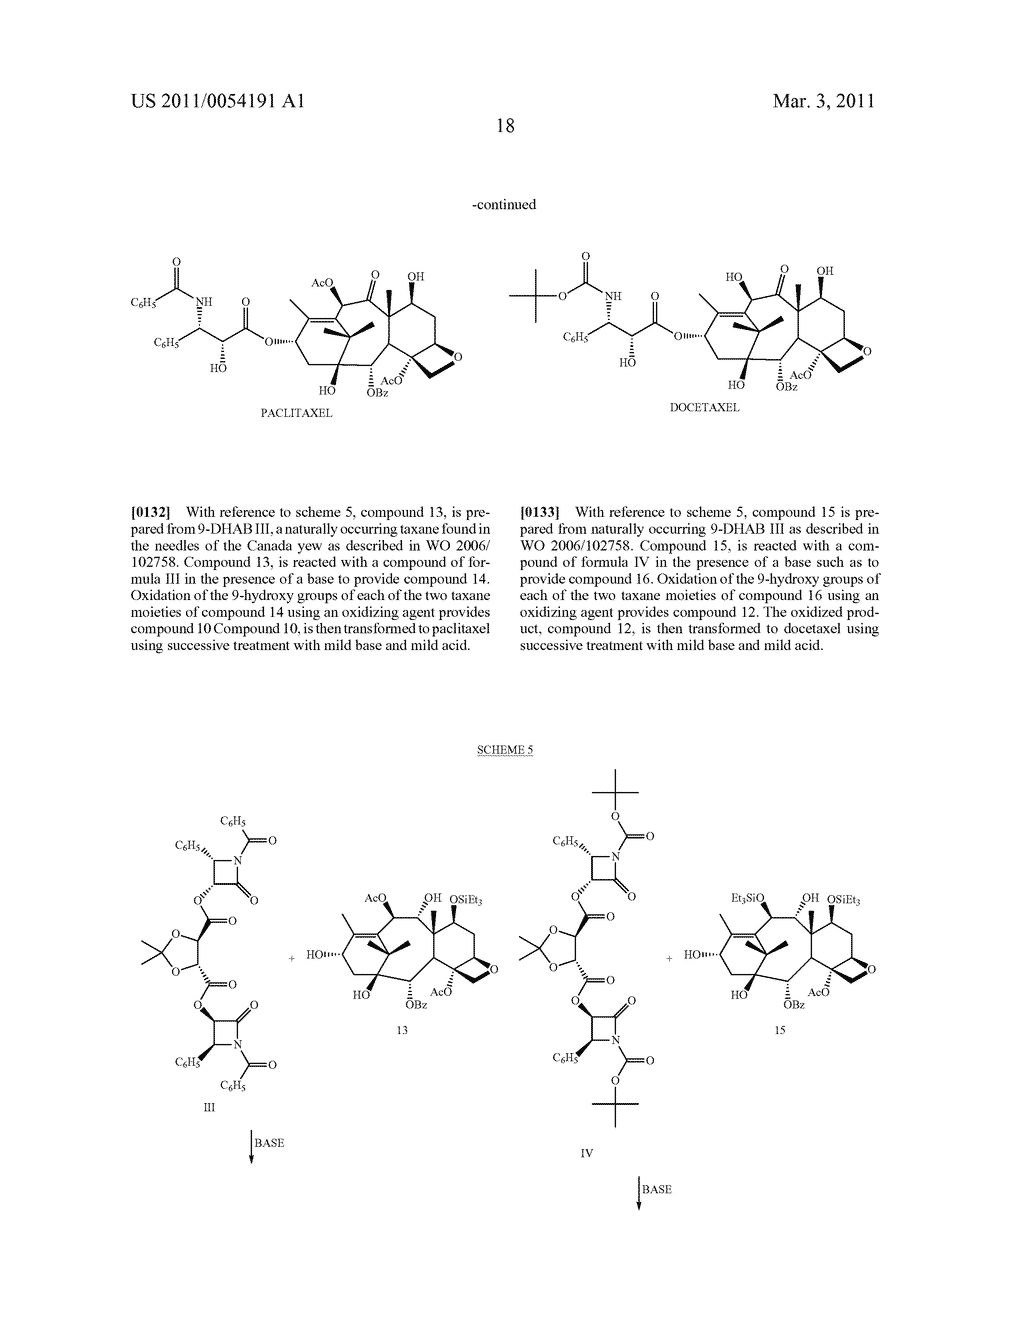 NEW METHODS FOR THE PREPARATION OF TAXANES USING CHIRAL AUXILIARIES - diagram, schematic, and image 19